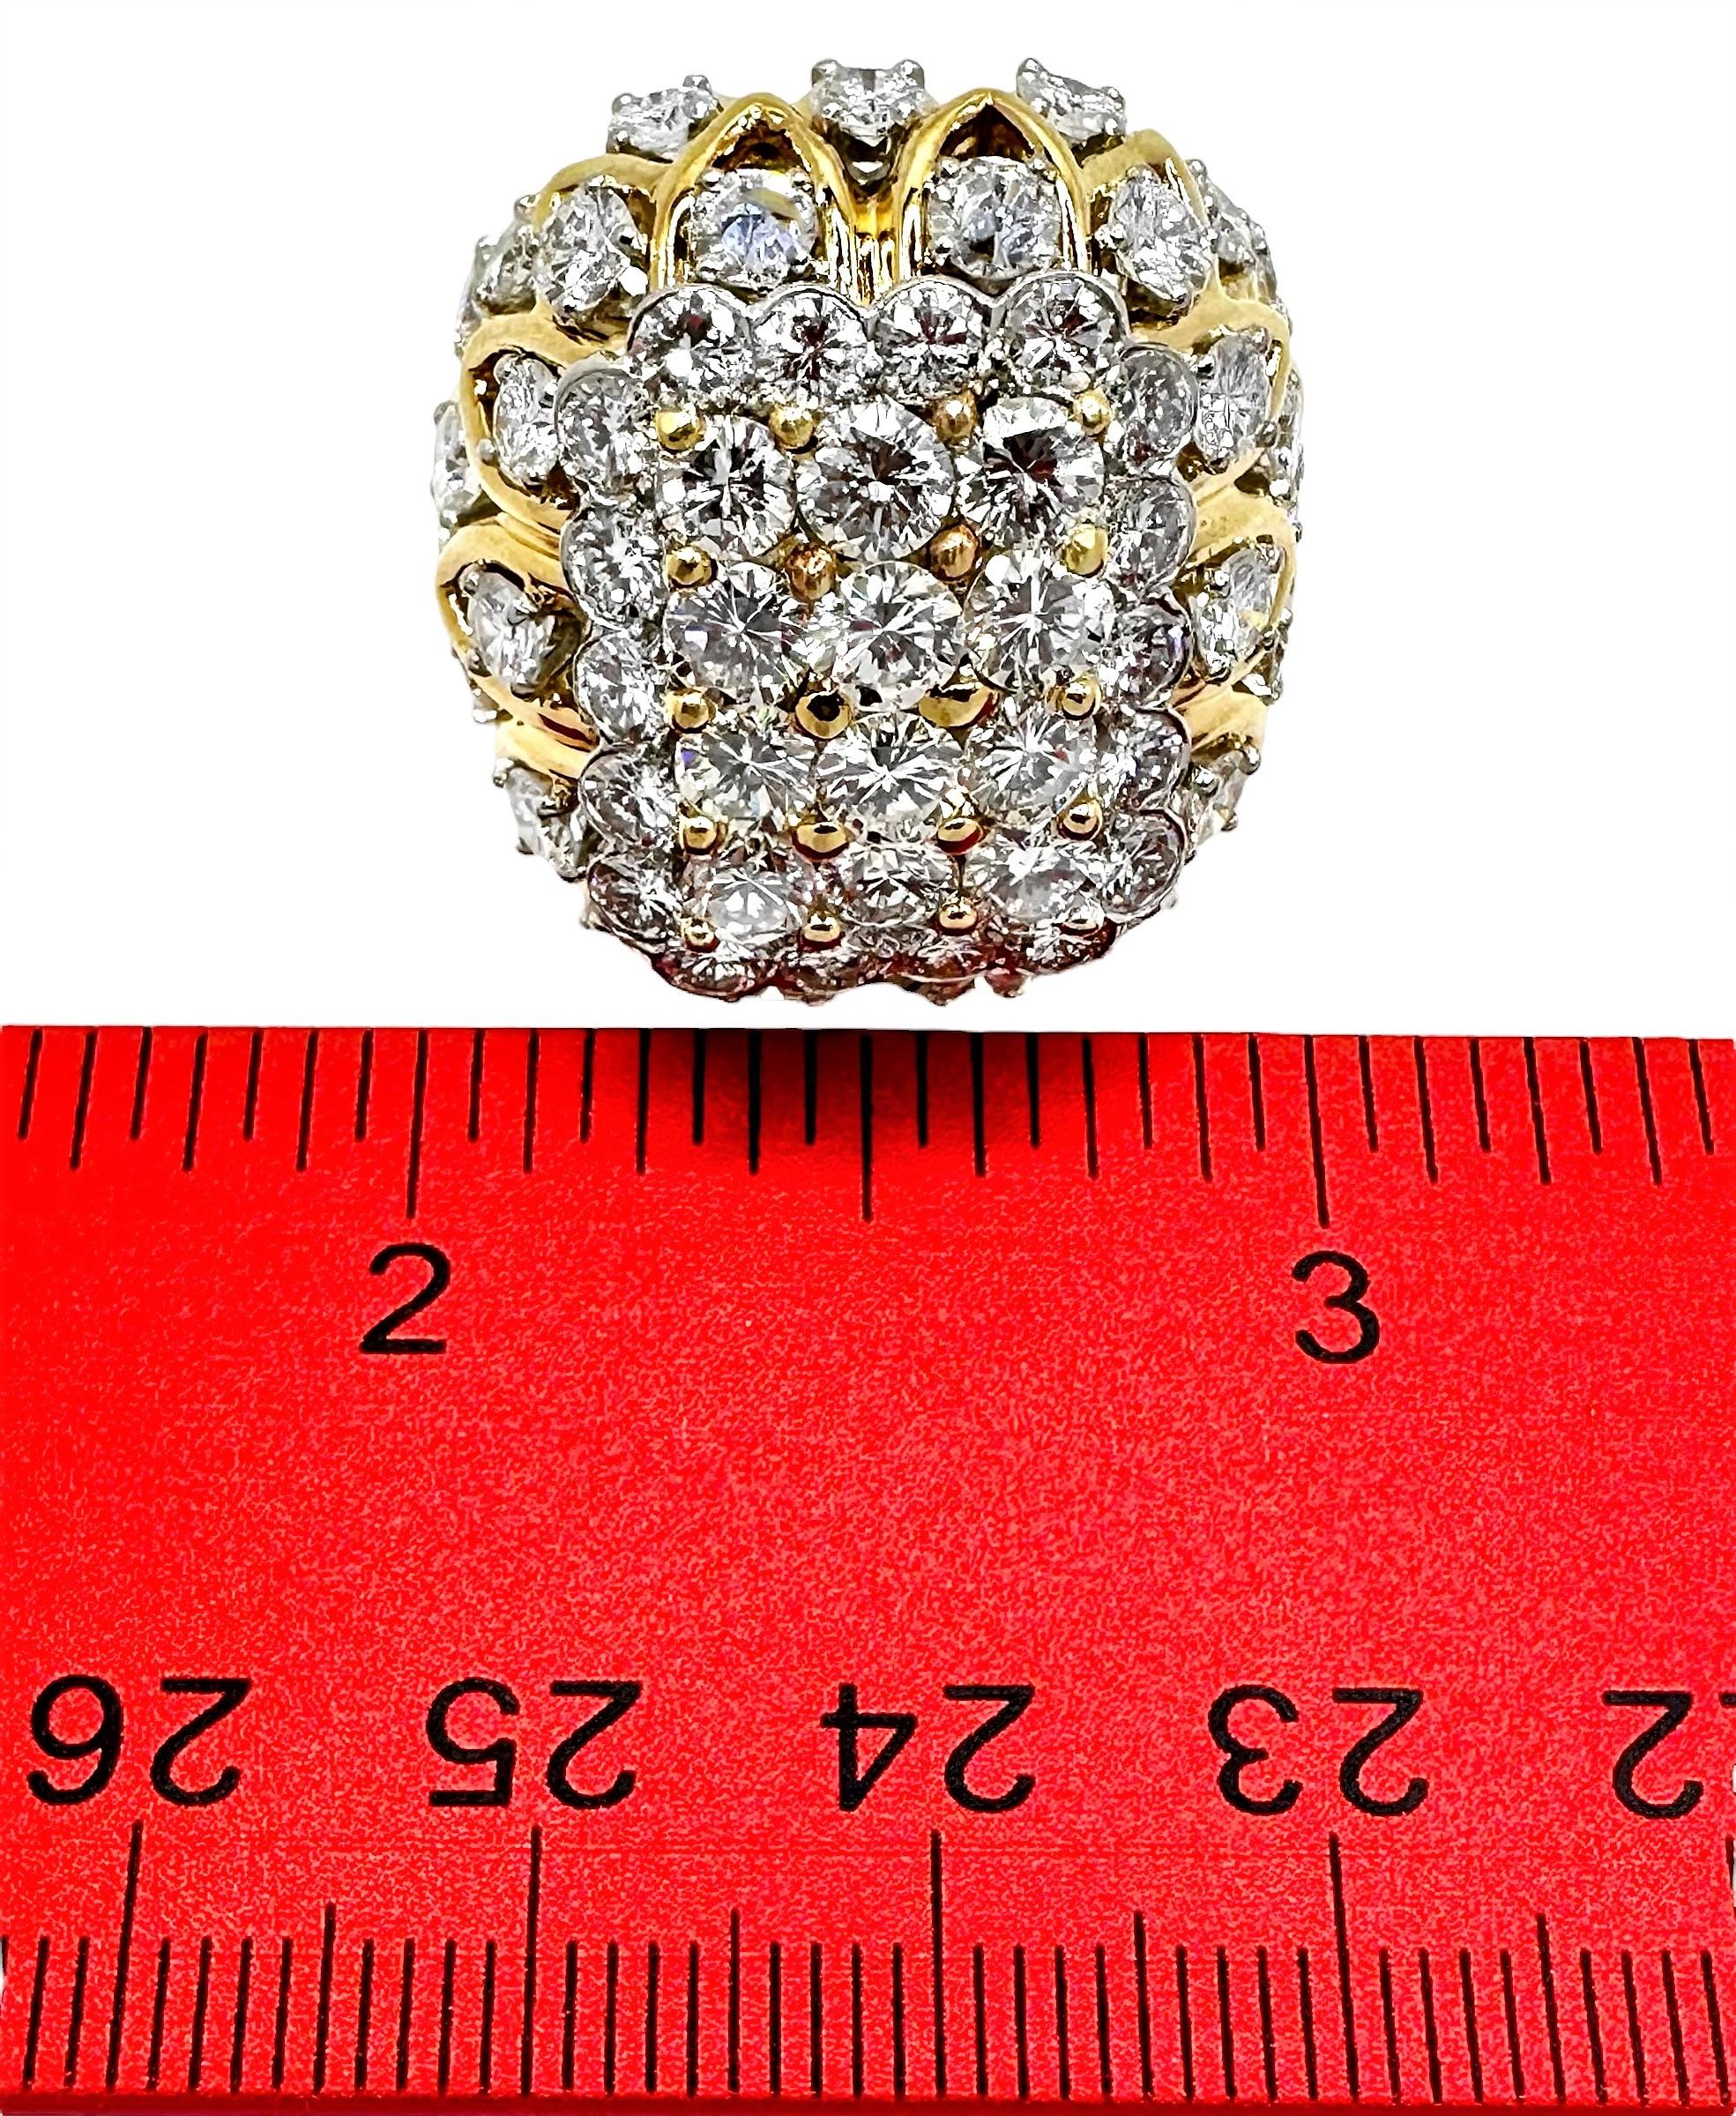 Large Scale 1970s Diamond Platinum and Gold Cocktail Ring 8.5carats Total In Good Condition For Sale In Palm Beach, FL